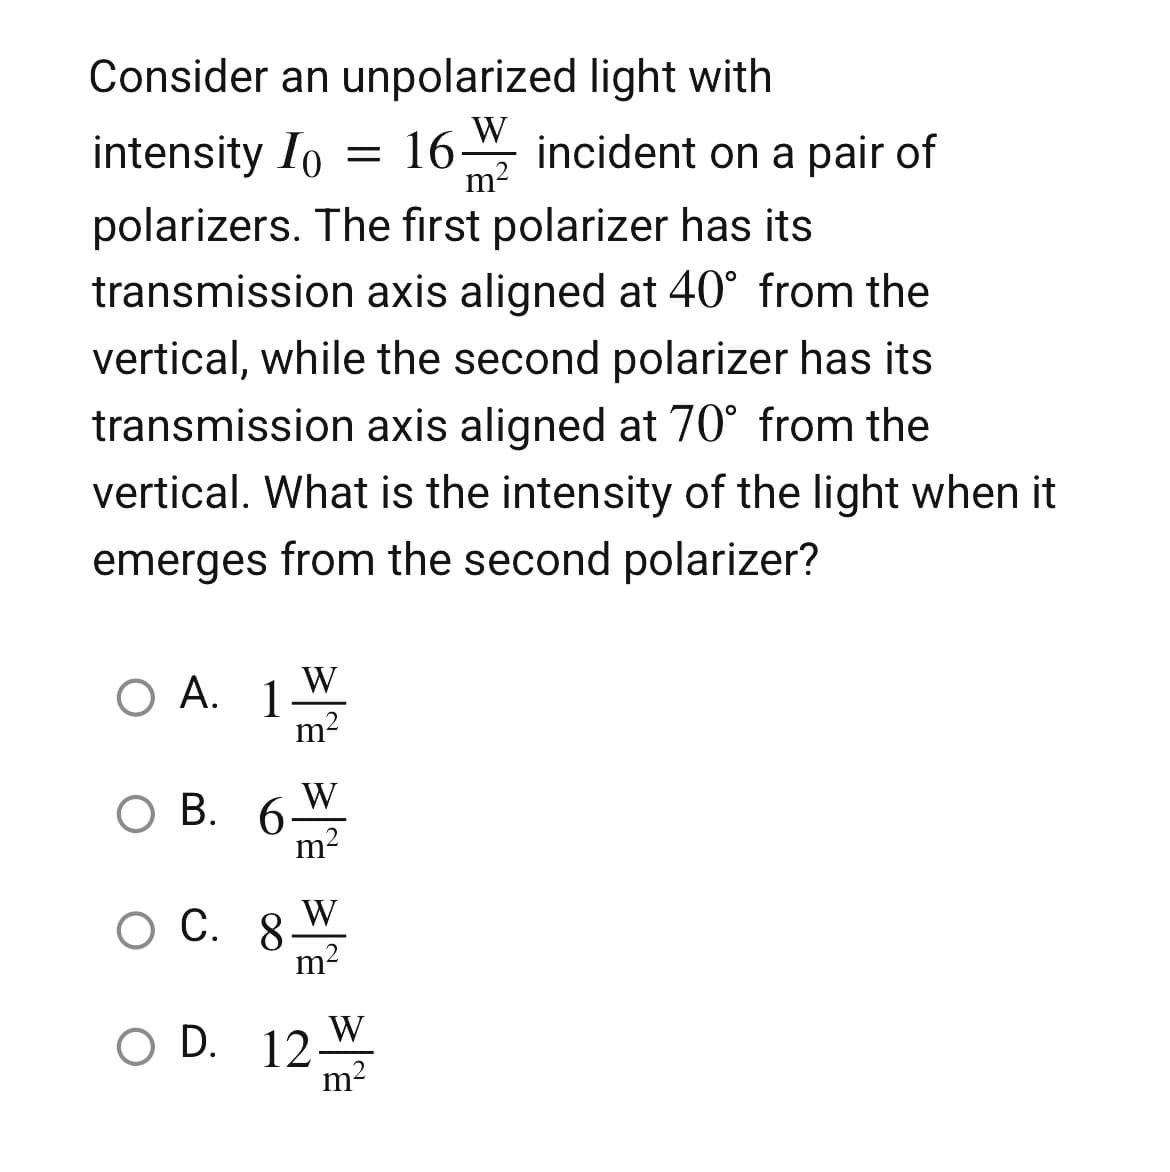 Consider an unpolarized light with
W
m
intensity I = 16 incident on a pair of
polarizers. The first polarizer has its
transmission axis aligned at 40° from the
vertical, while the second polarizer has its
transmission axis aligned at 70° from the
vertical. What is the intensity of the light when it
emerges from the second polarizer?
W
O A. 1
O B.
B. 6
O C. 8.
O D. 12
하늘향
m²
W
m²
W
m²